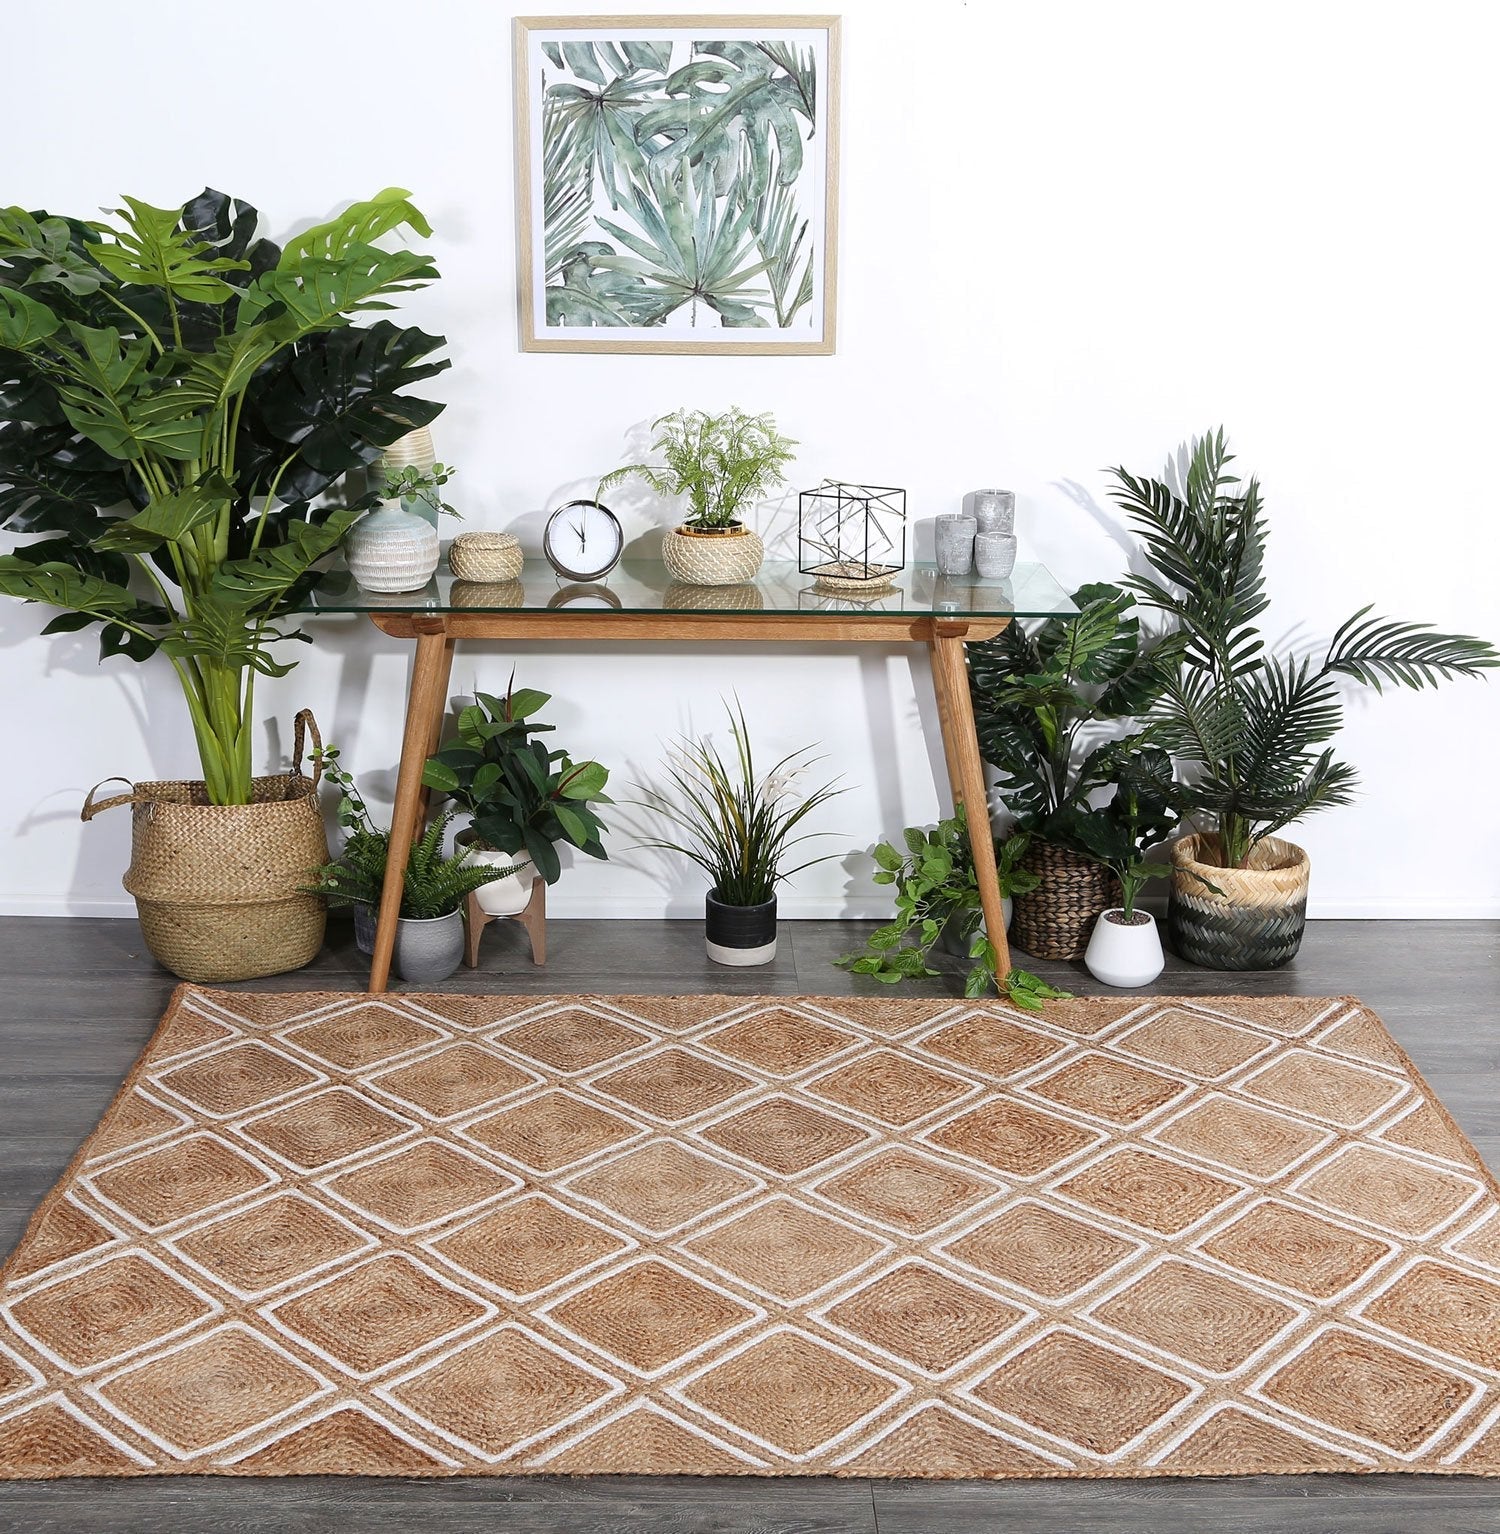 Artisan Parquetry in Natural